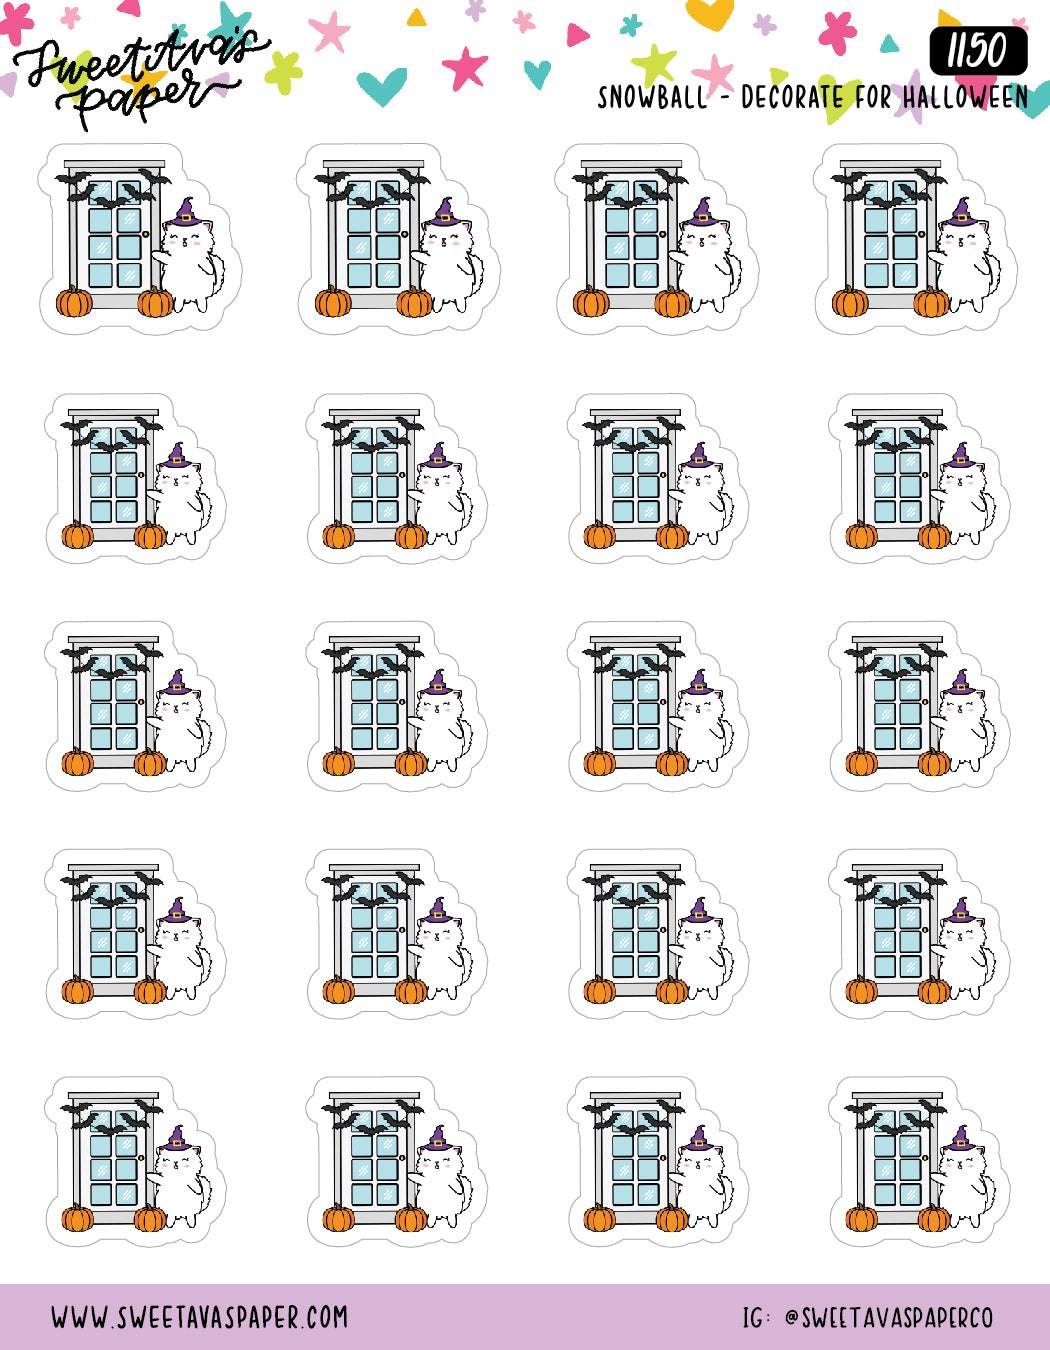 Decorating For Halloween Planner Stickers - Snowball The Cat [1150]